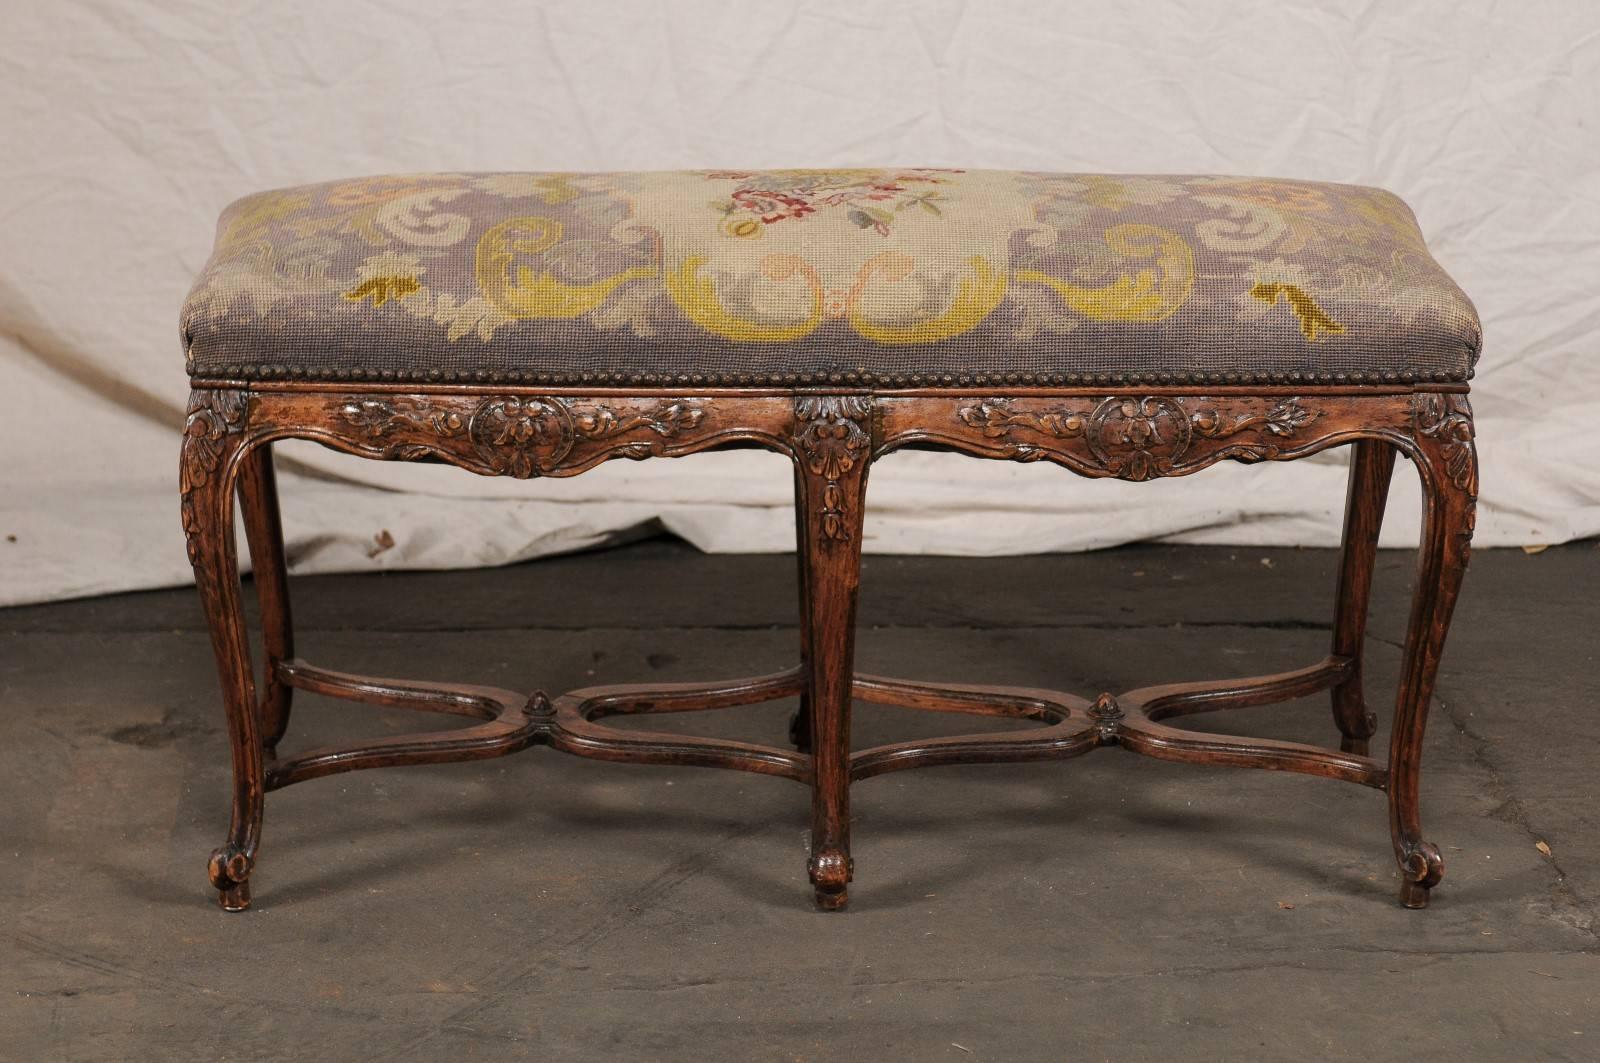 19th-20th Century French Louis XV Style Needlepoint Bench 2